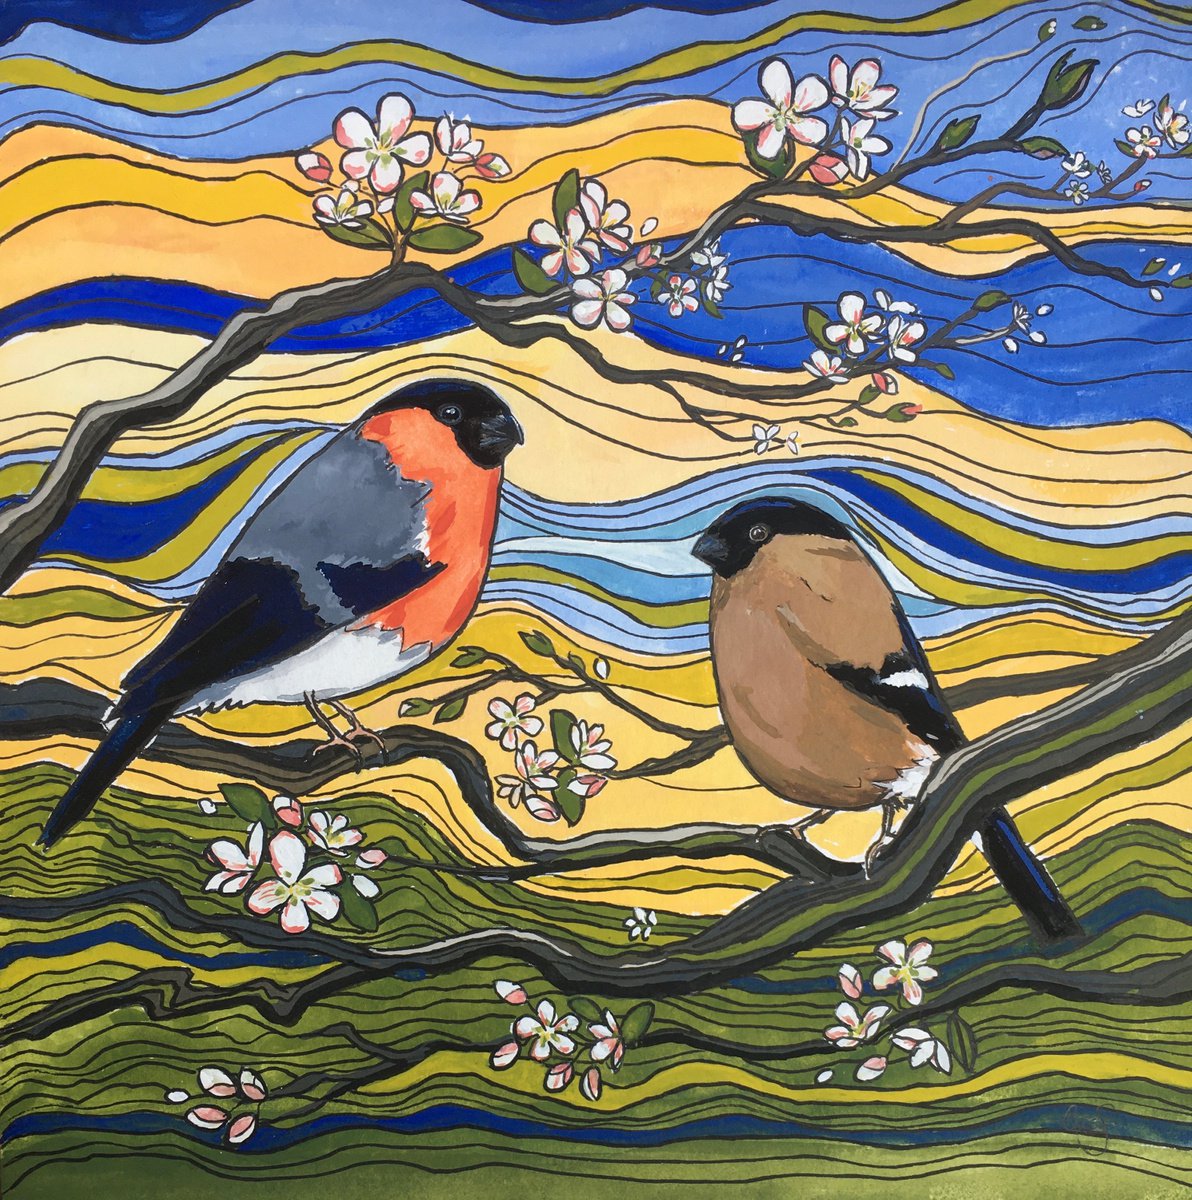 A Pair of Bullfinches by Lucy Smerdon